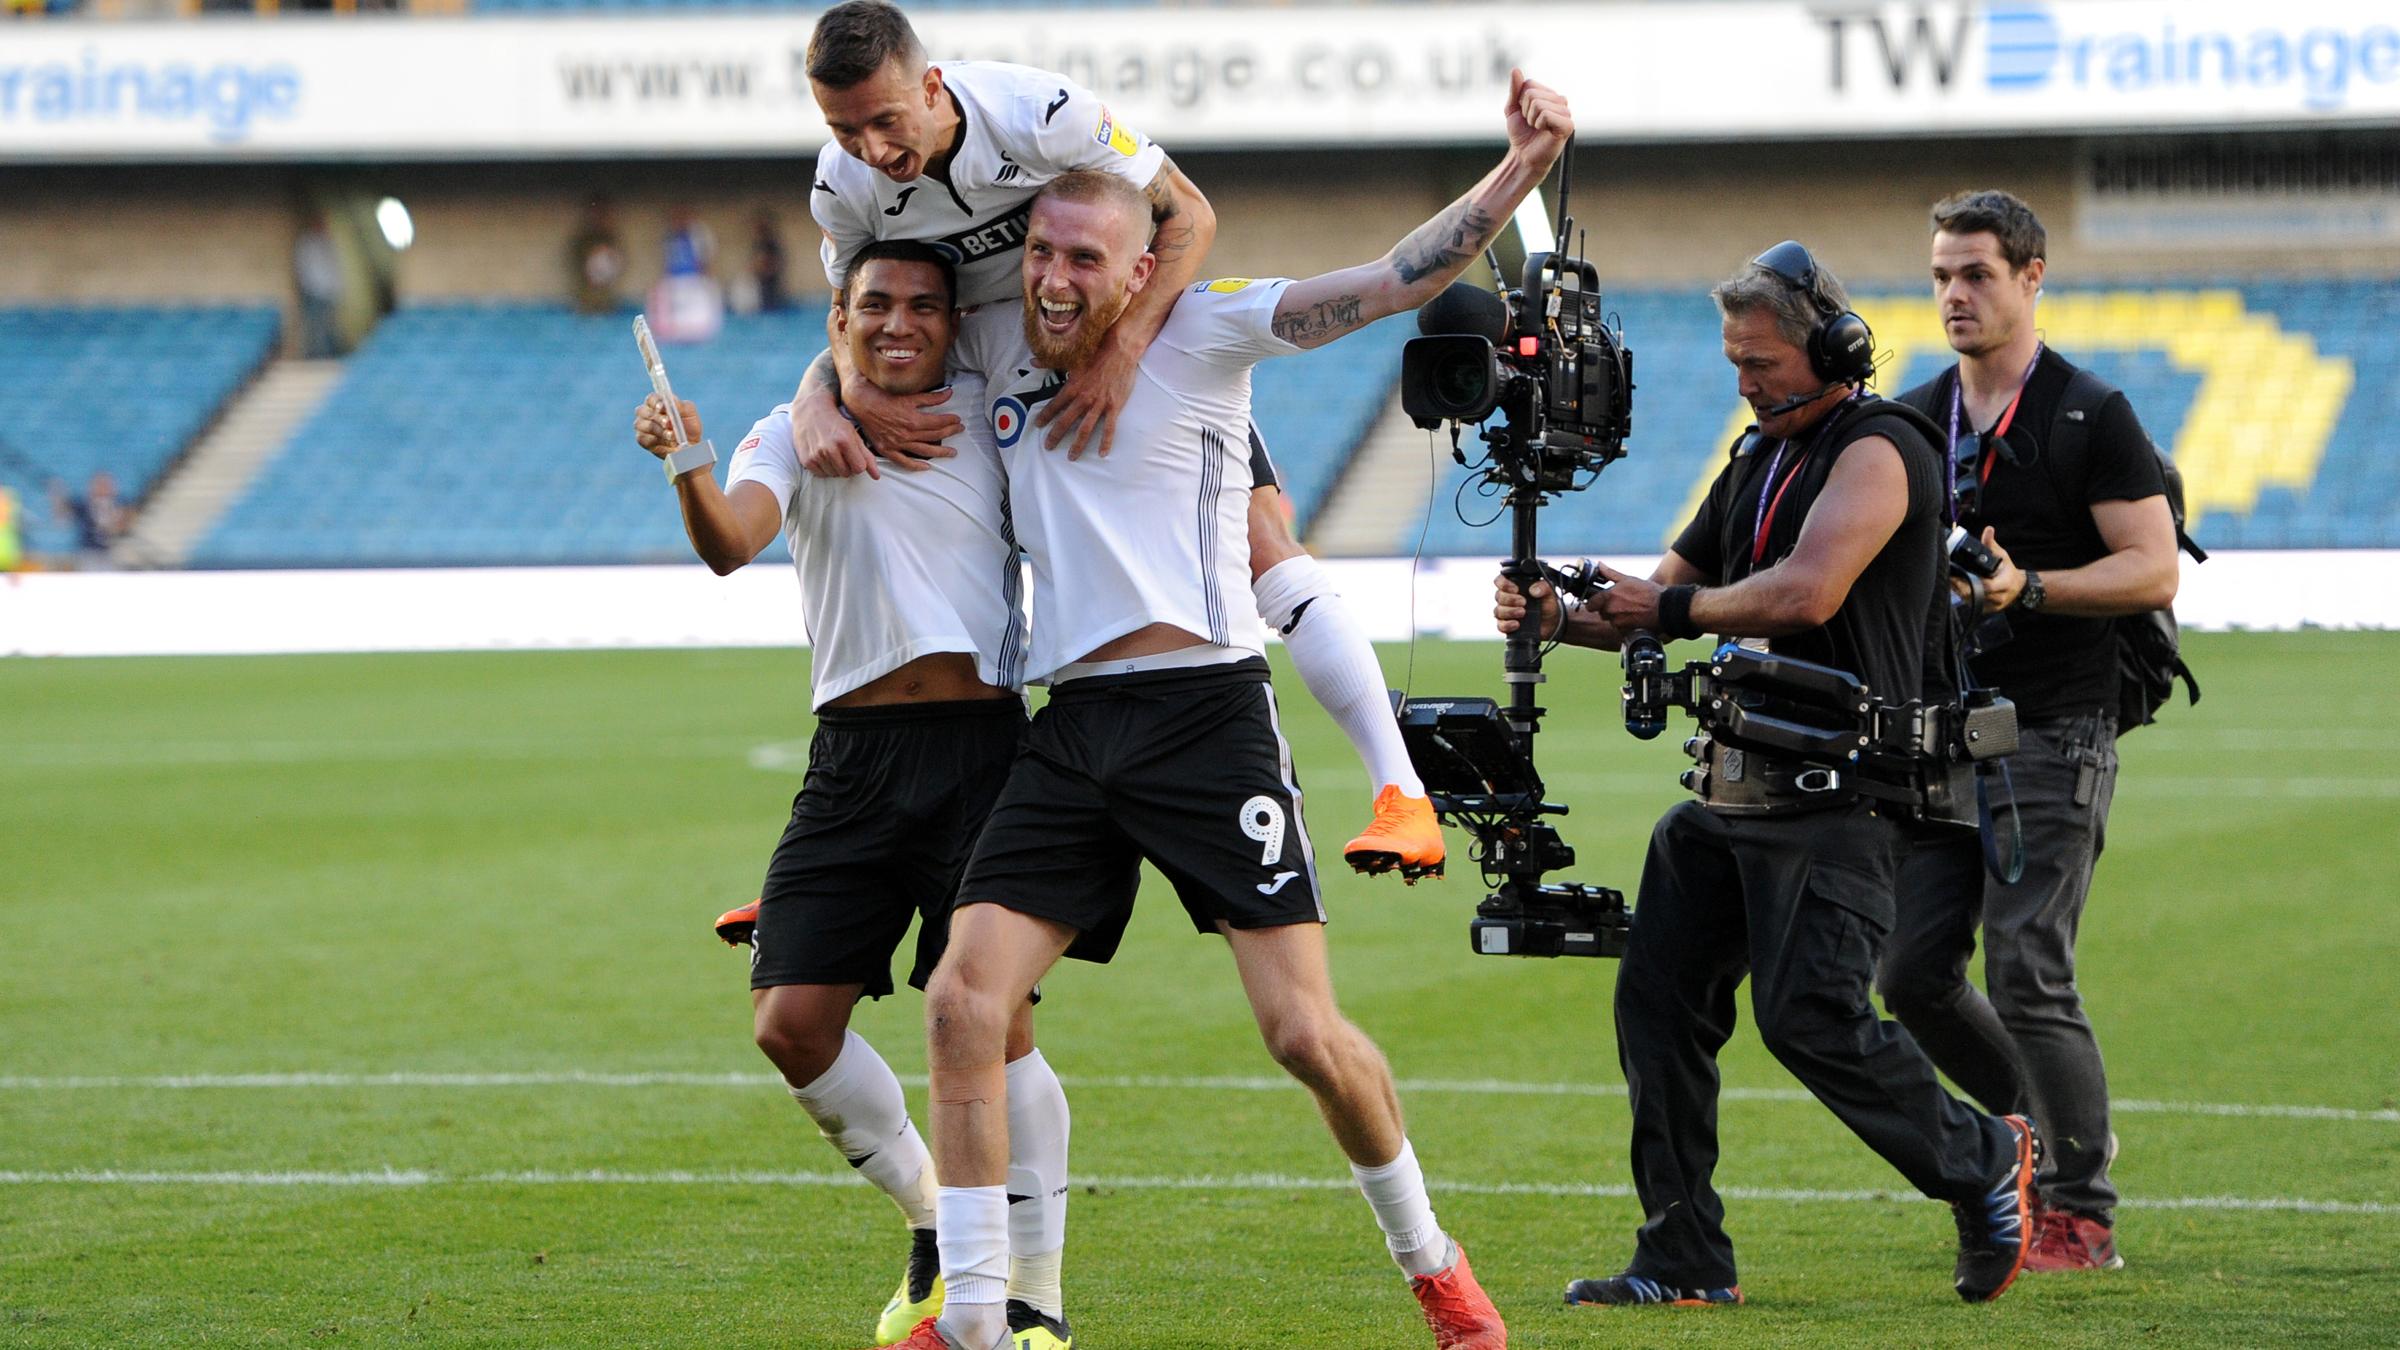 The Swans celebrate after beating Millwall.